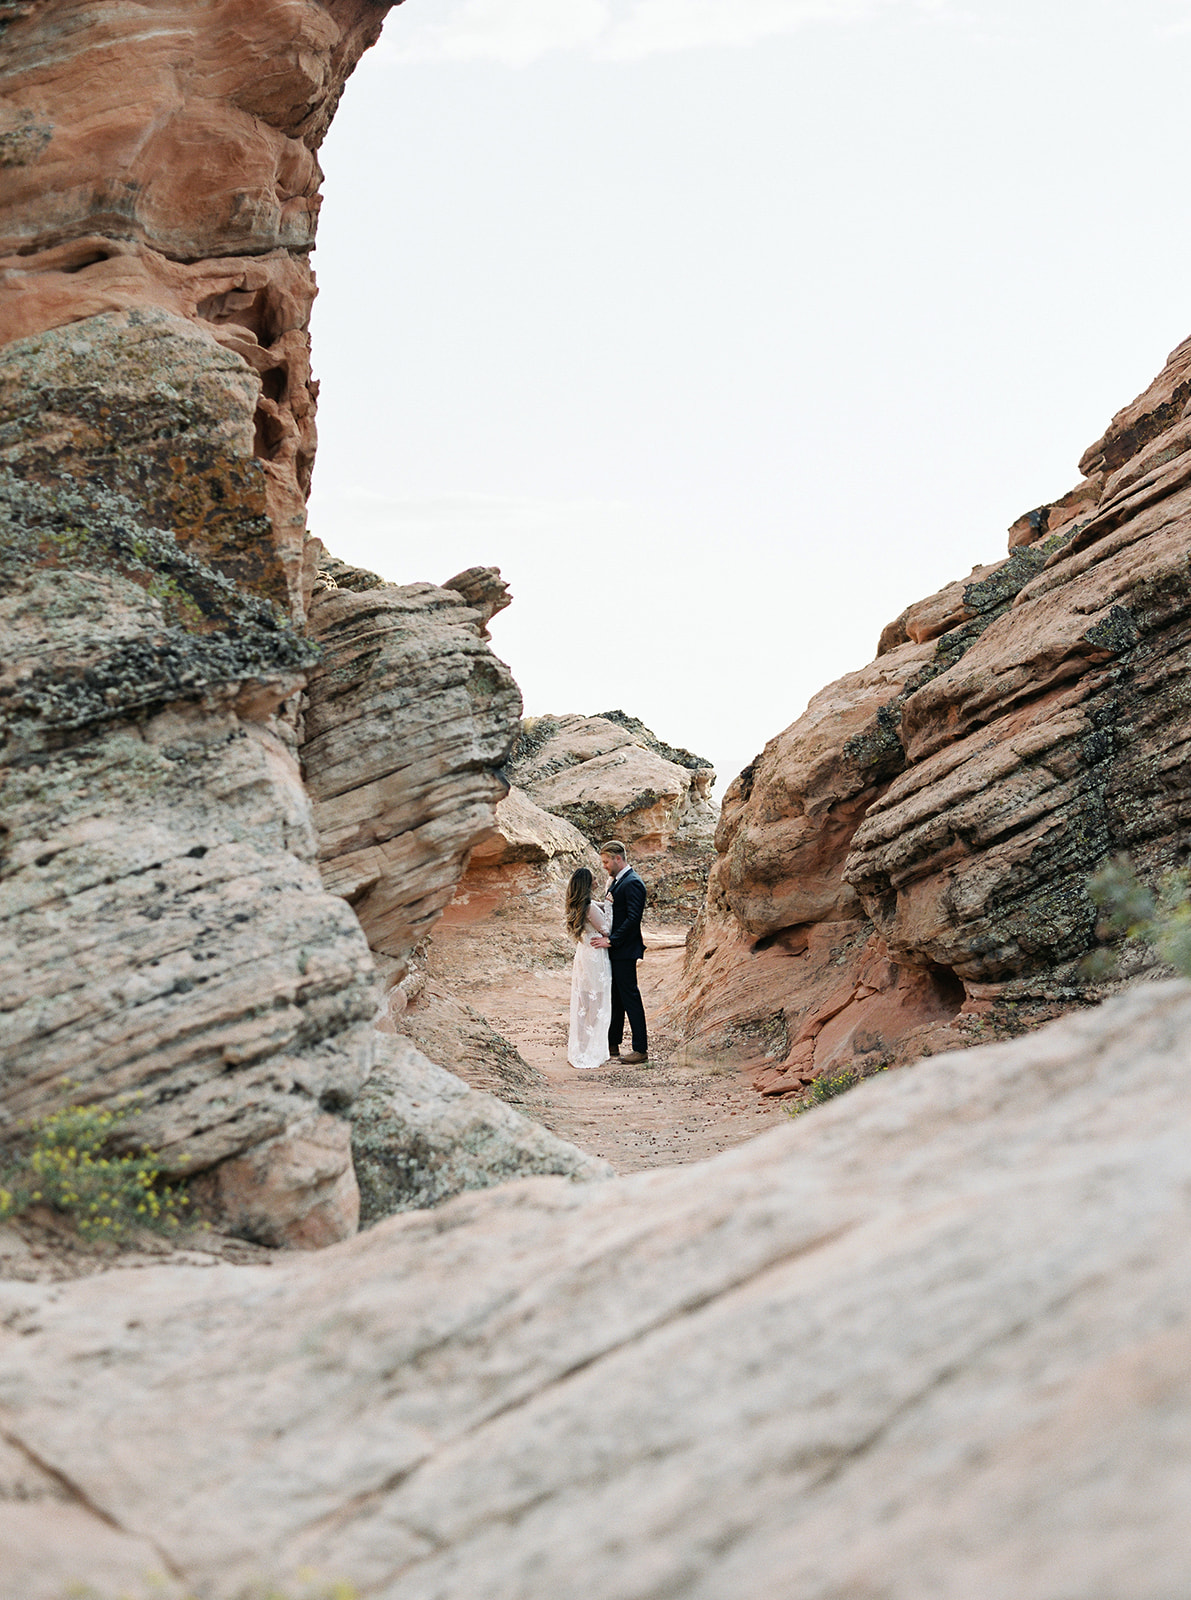 A bride and groom exploring the red rocks in Utah on their Elopement day in Zion National Park!